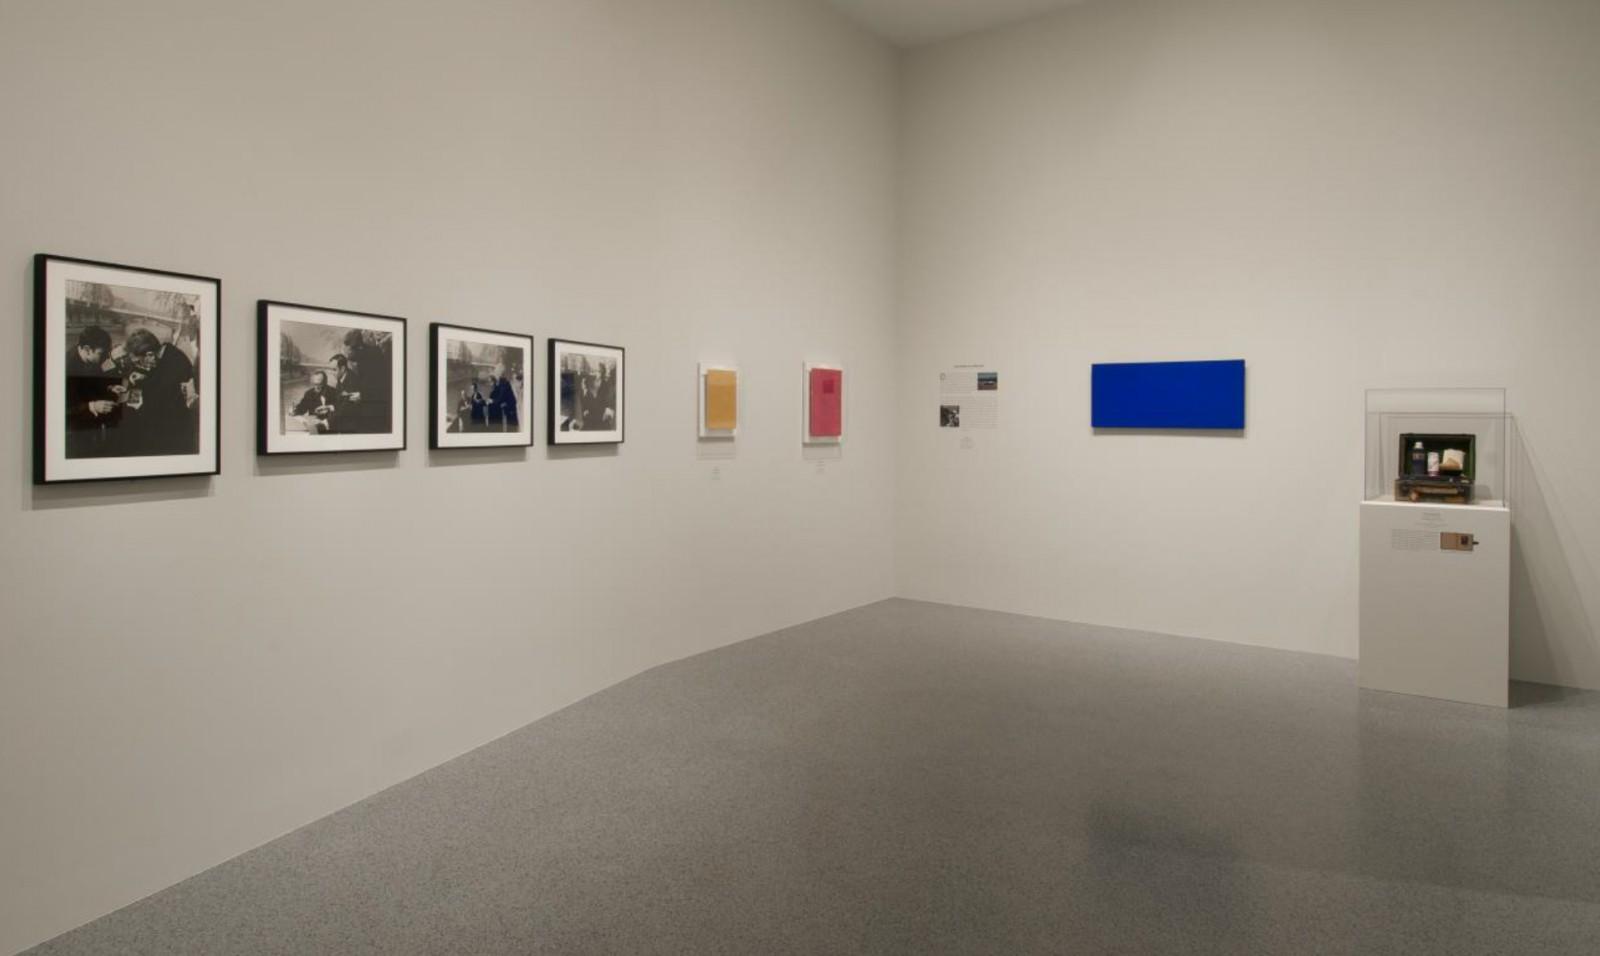 Vue de l'exposition "From Los Angeles to New York: The Dwan Gallery 1959-1971", National Gallery of Art, 2017 (IKB 186, MG 31, MP 21)